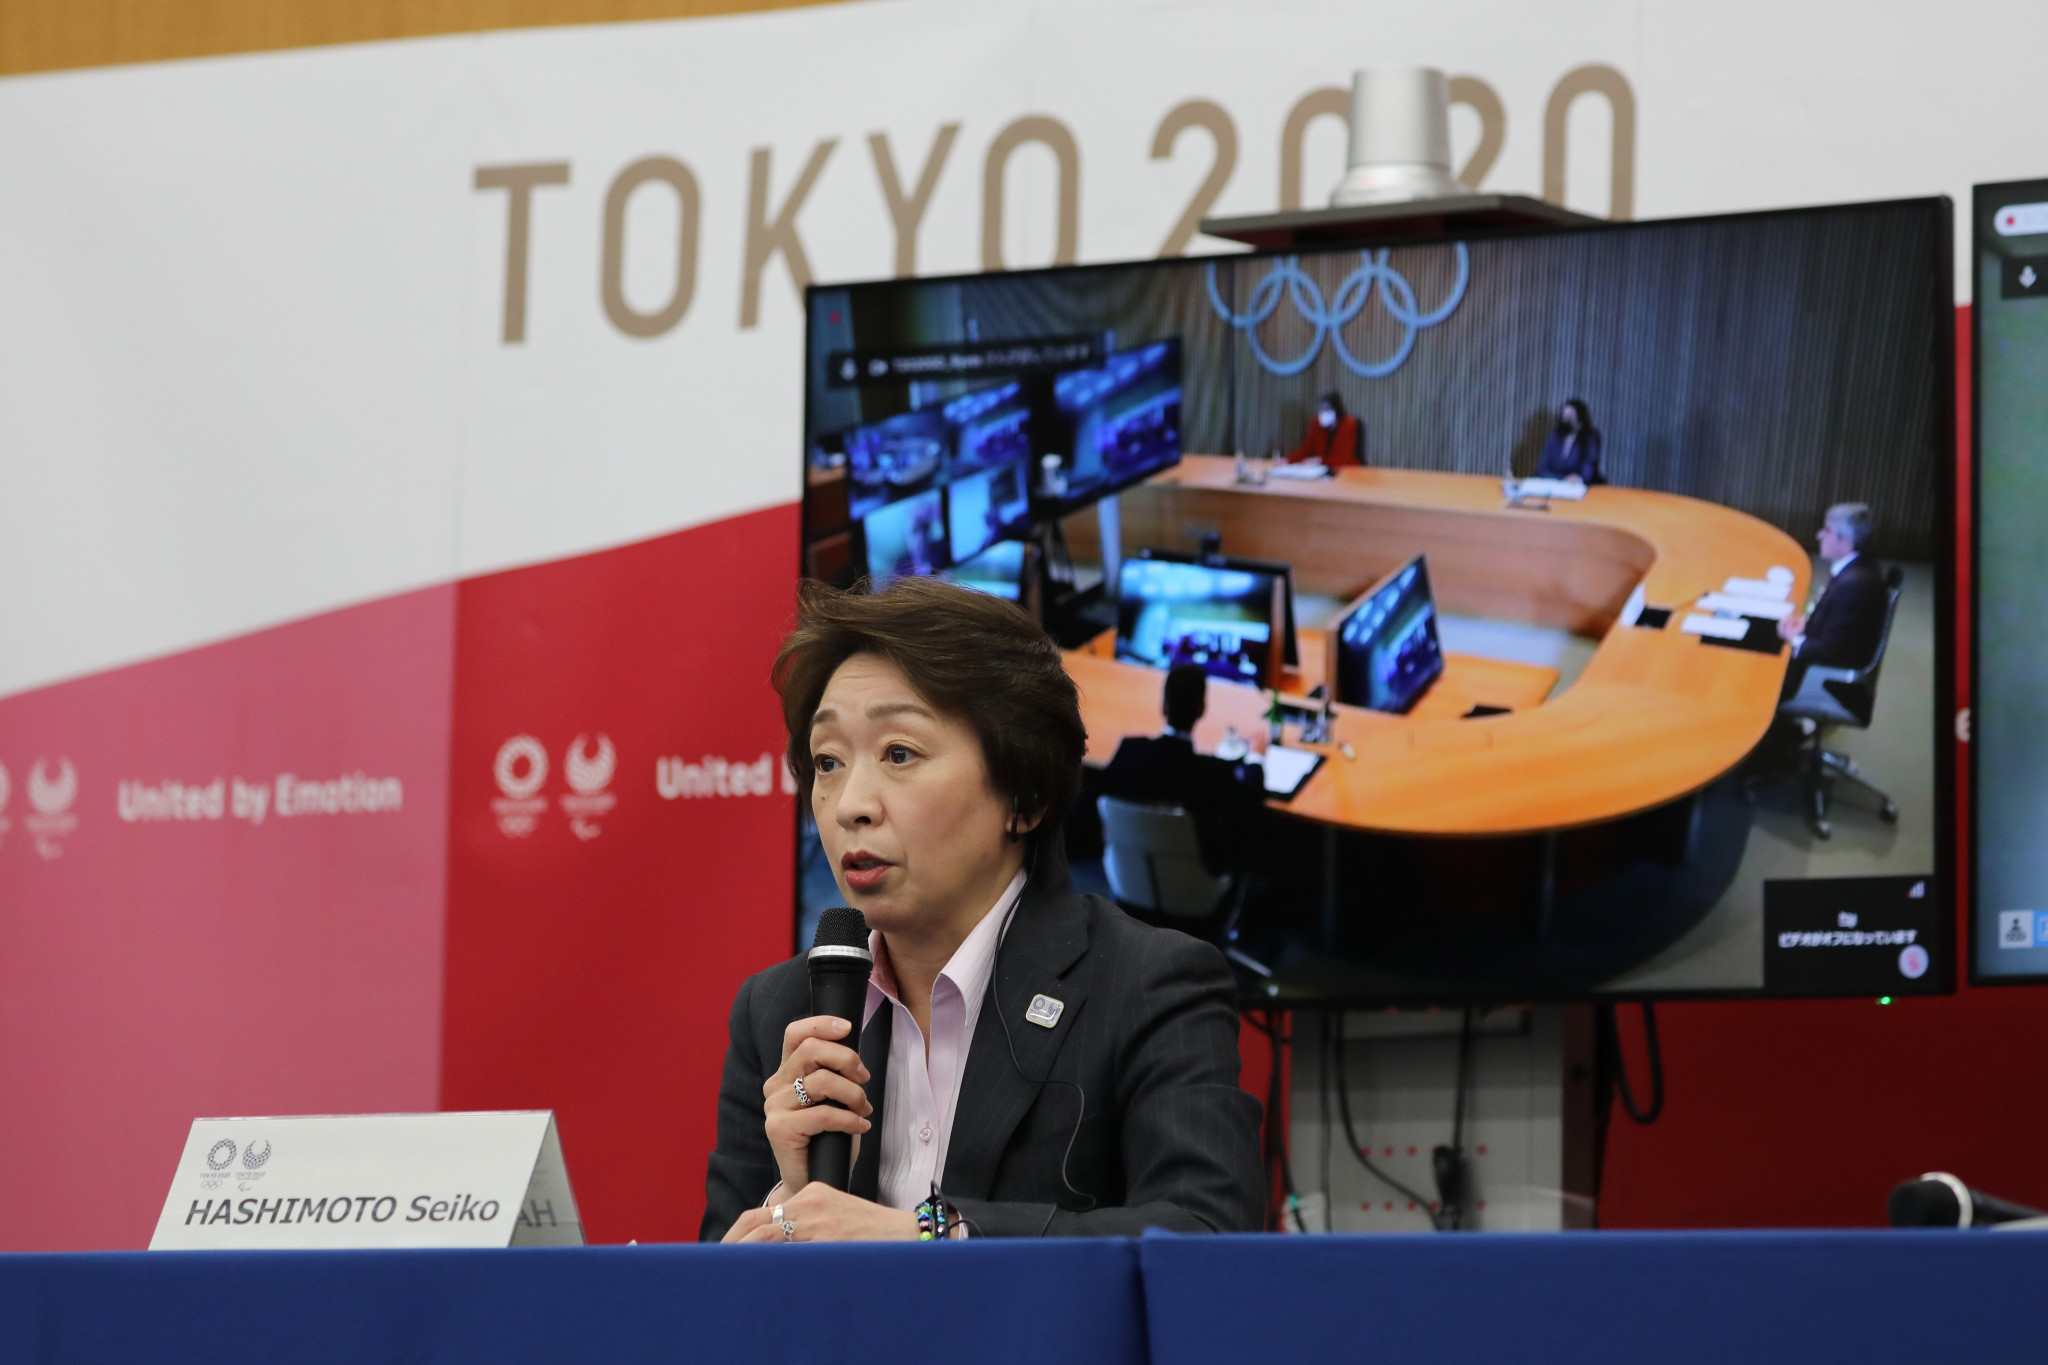 Tokyo 2020 President Seiko Hashimoto confirmed the appointment of 12 women to the Executive Board ©Getty Images